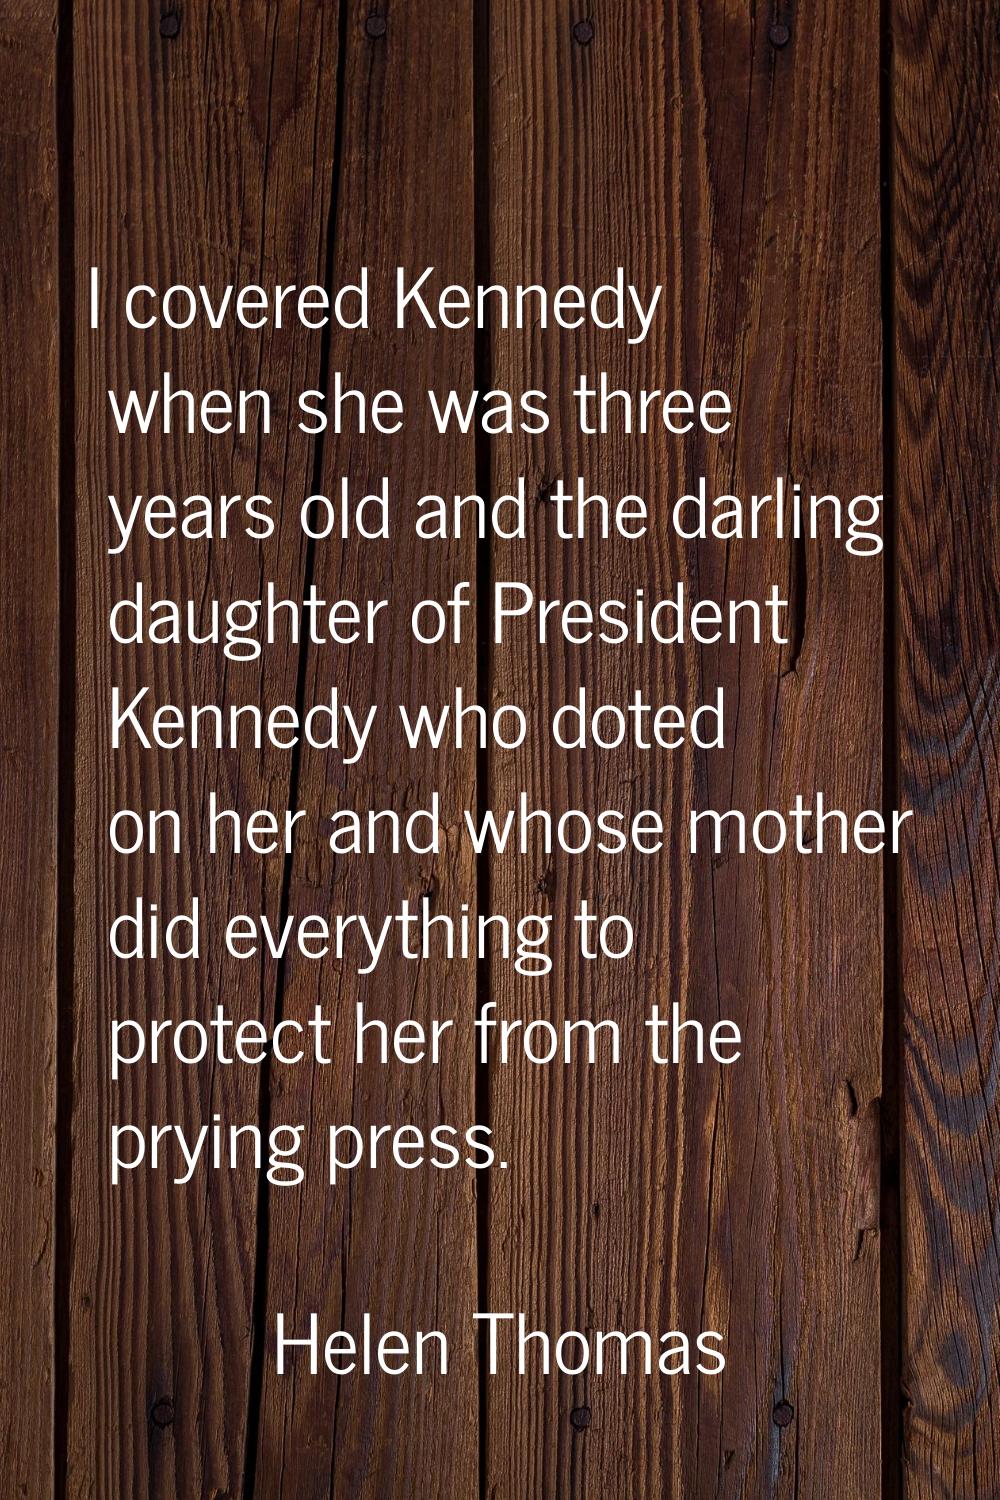 I covered Kennedy when she was three years old and the darling daughter of President Kennedy who do